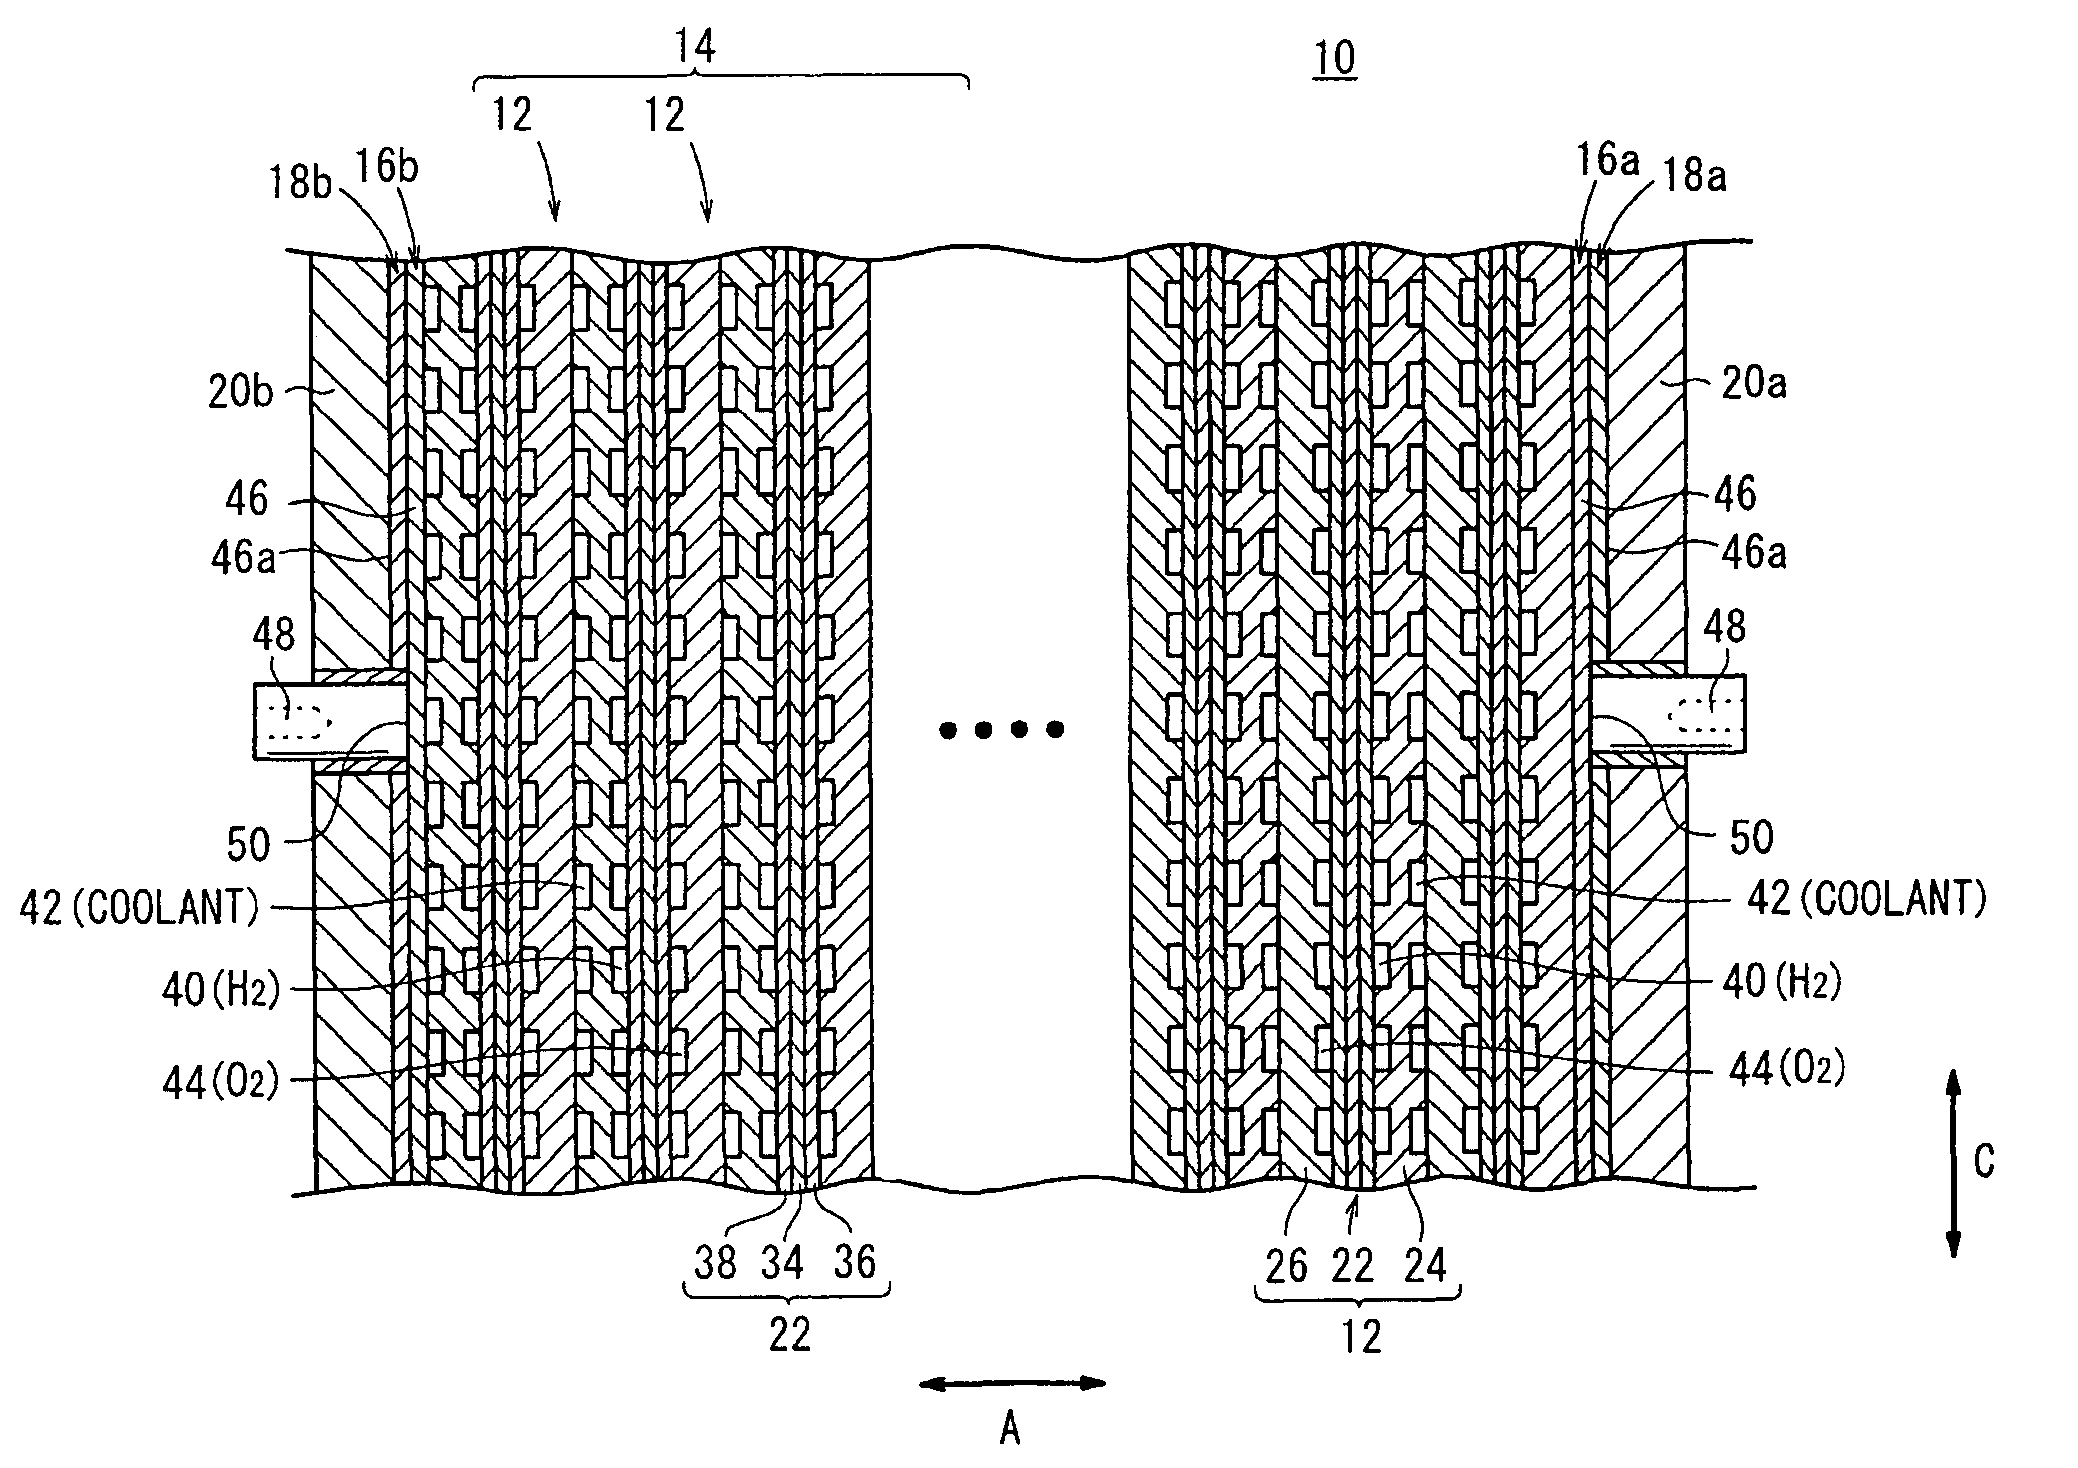 Fuel cell stack with power collecting terminals